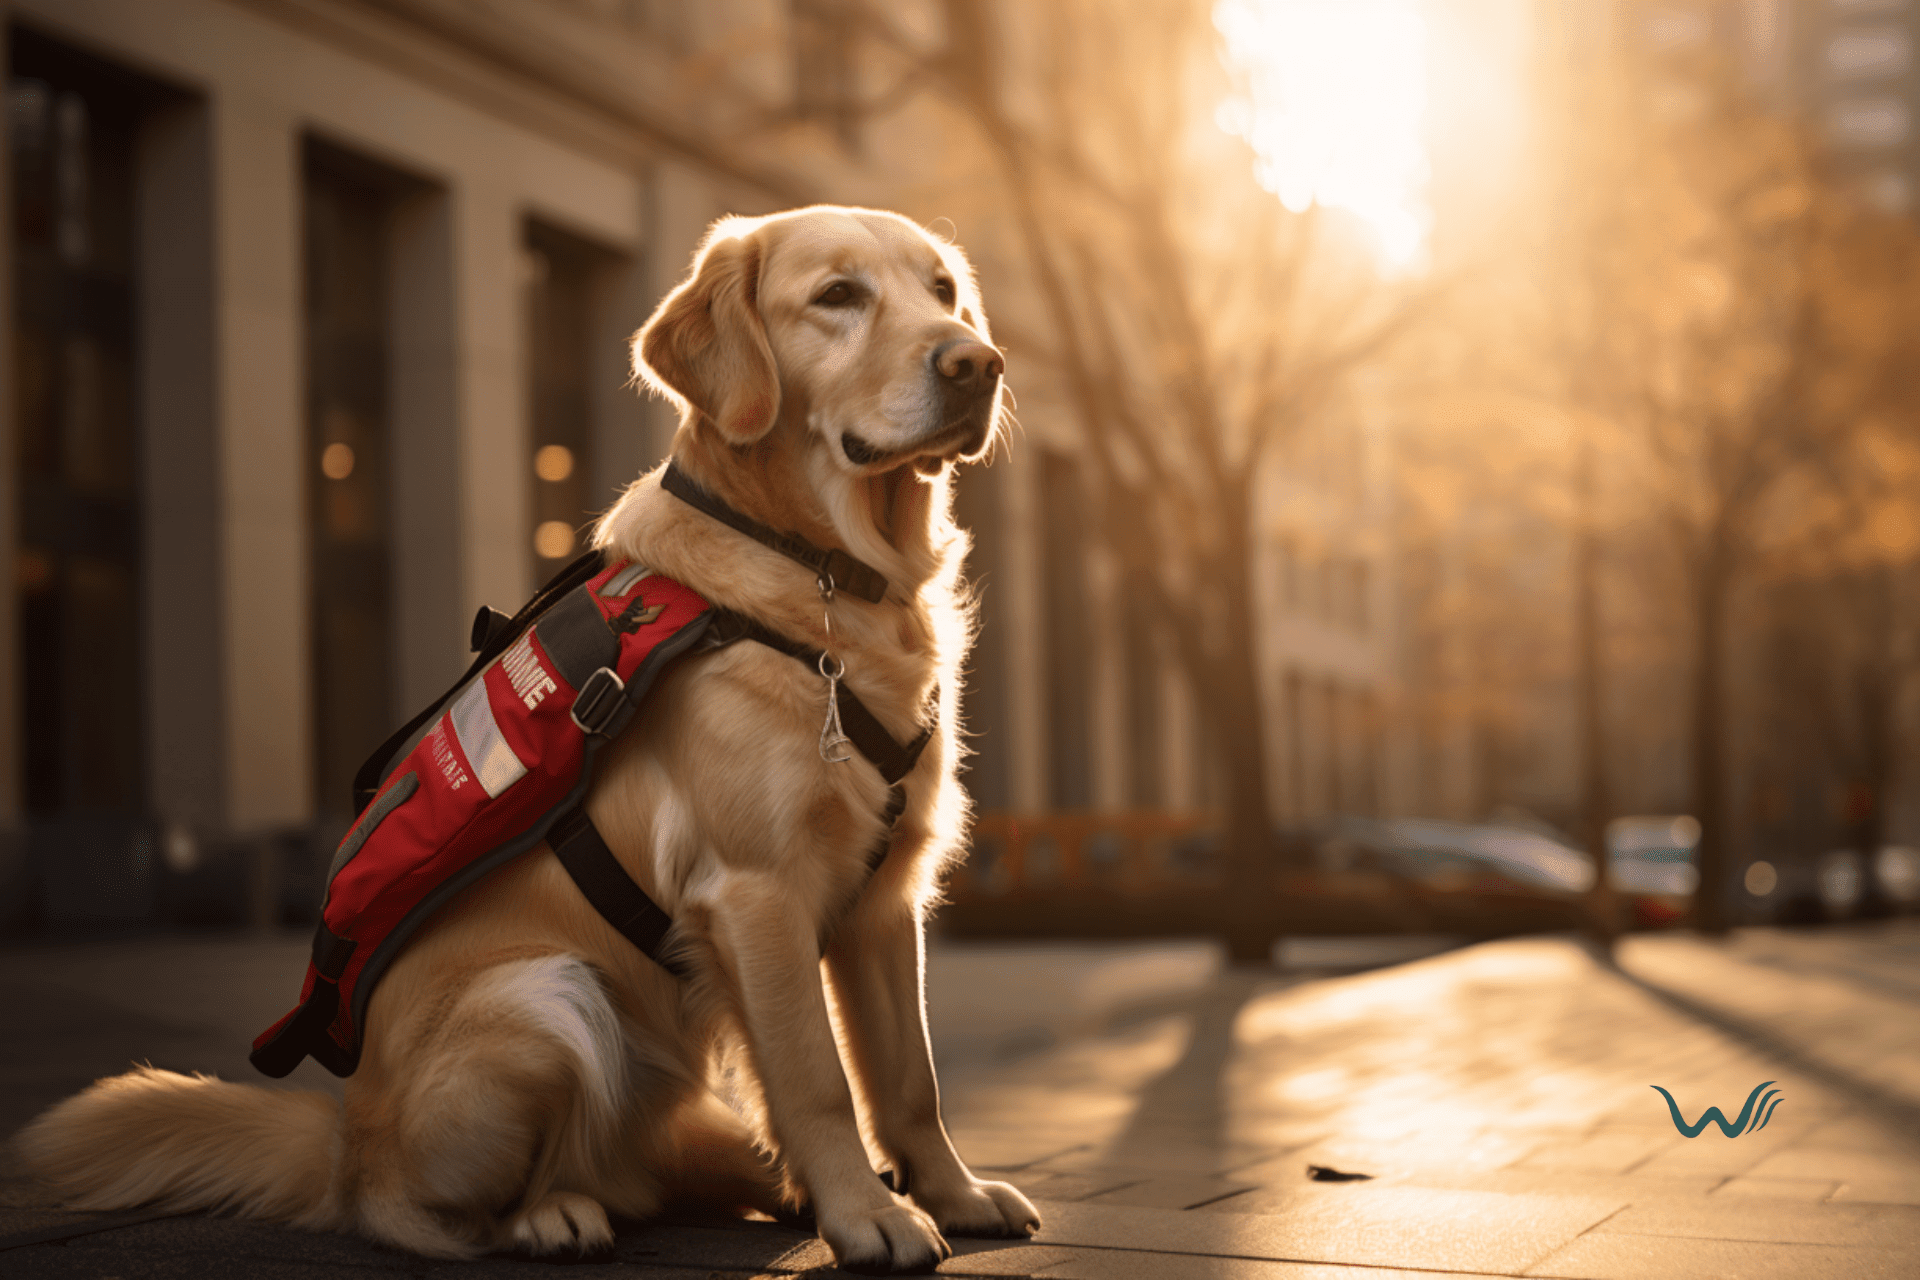 11 reasons to get an emotional support animal